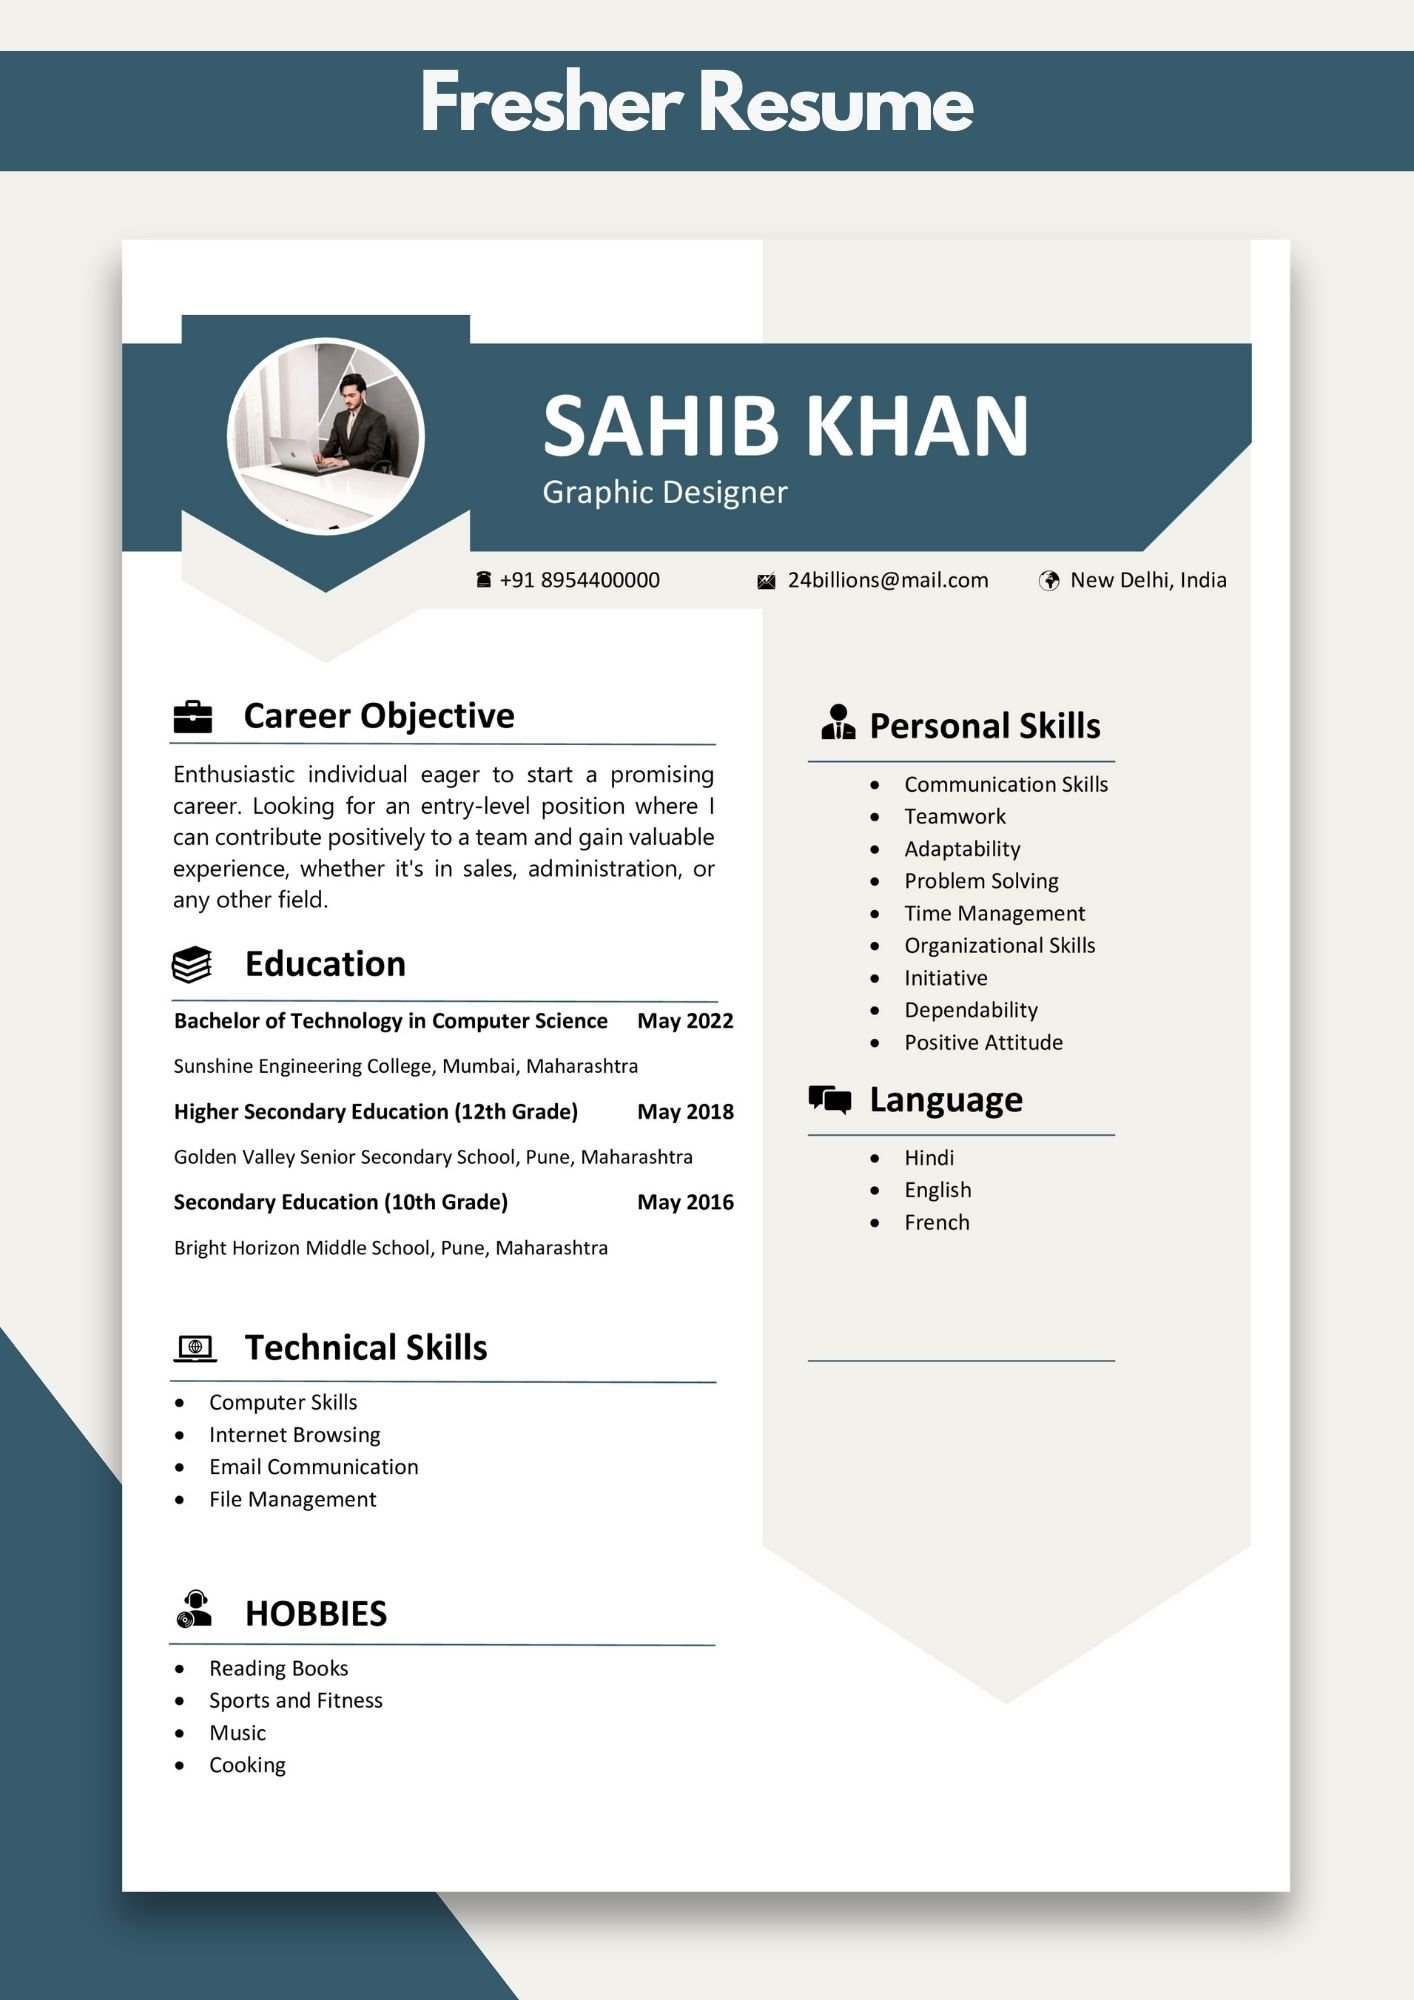 Free Download Fresher Resume Templates Pdf and Word